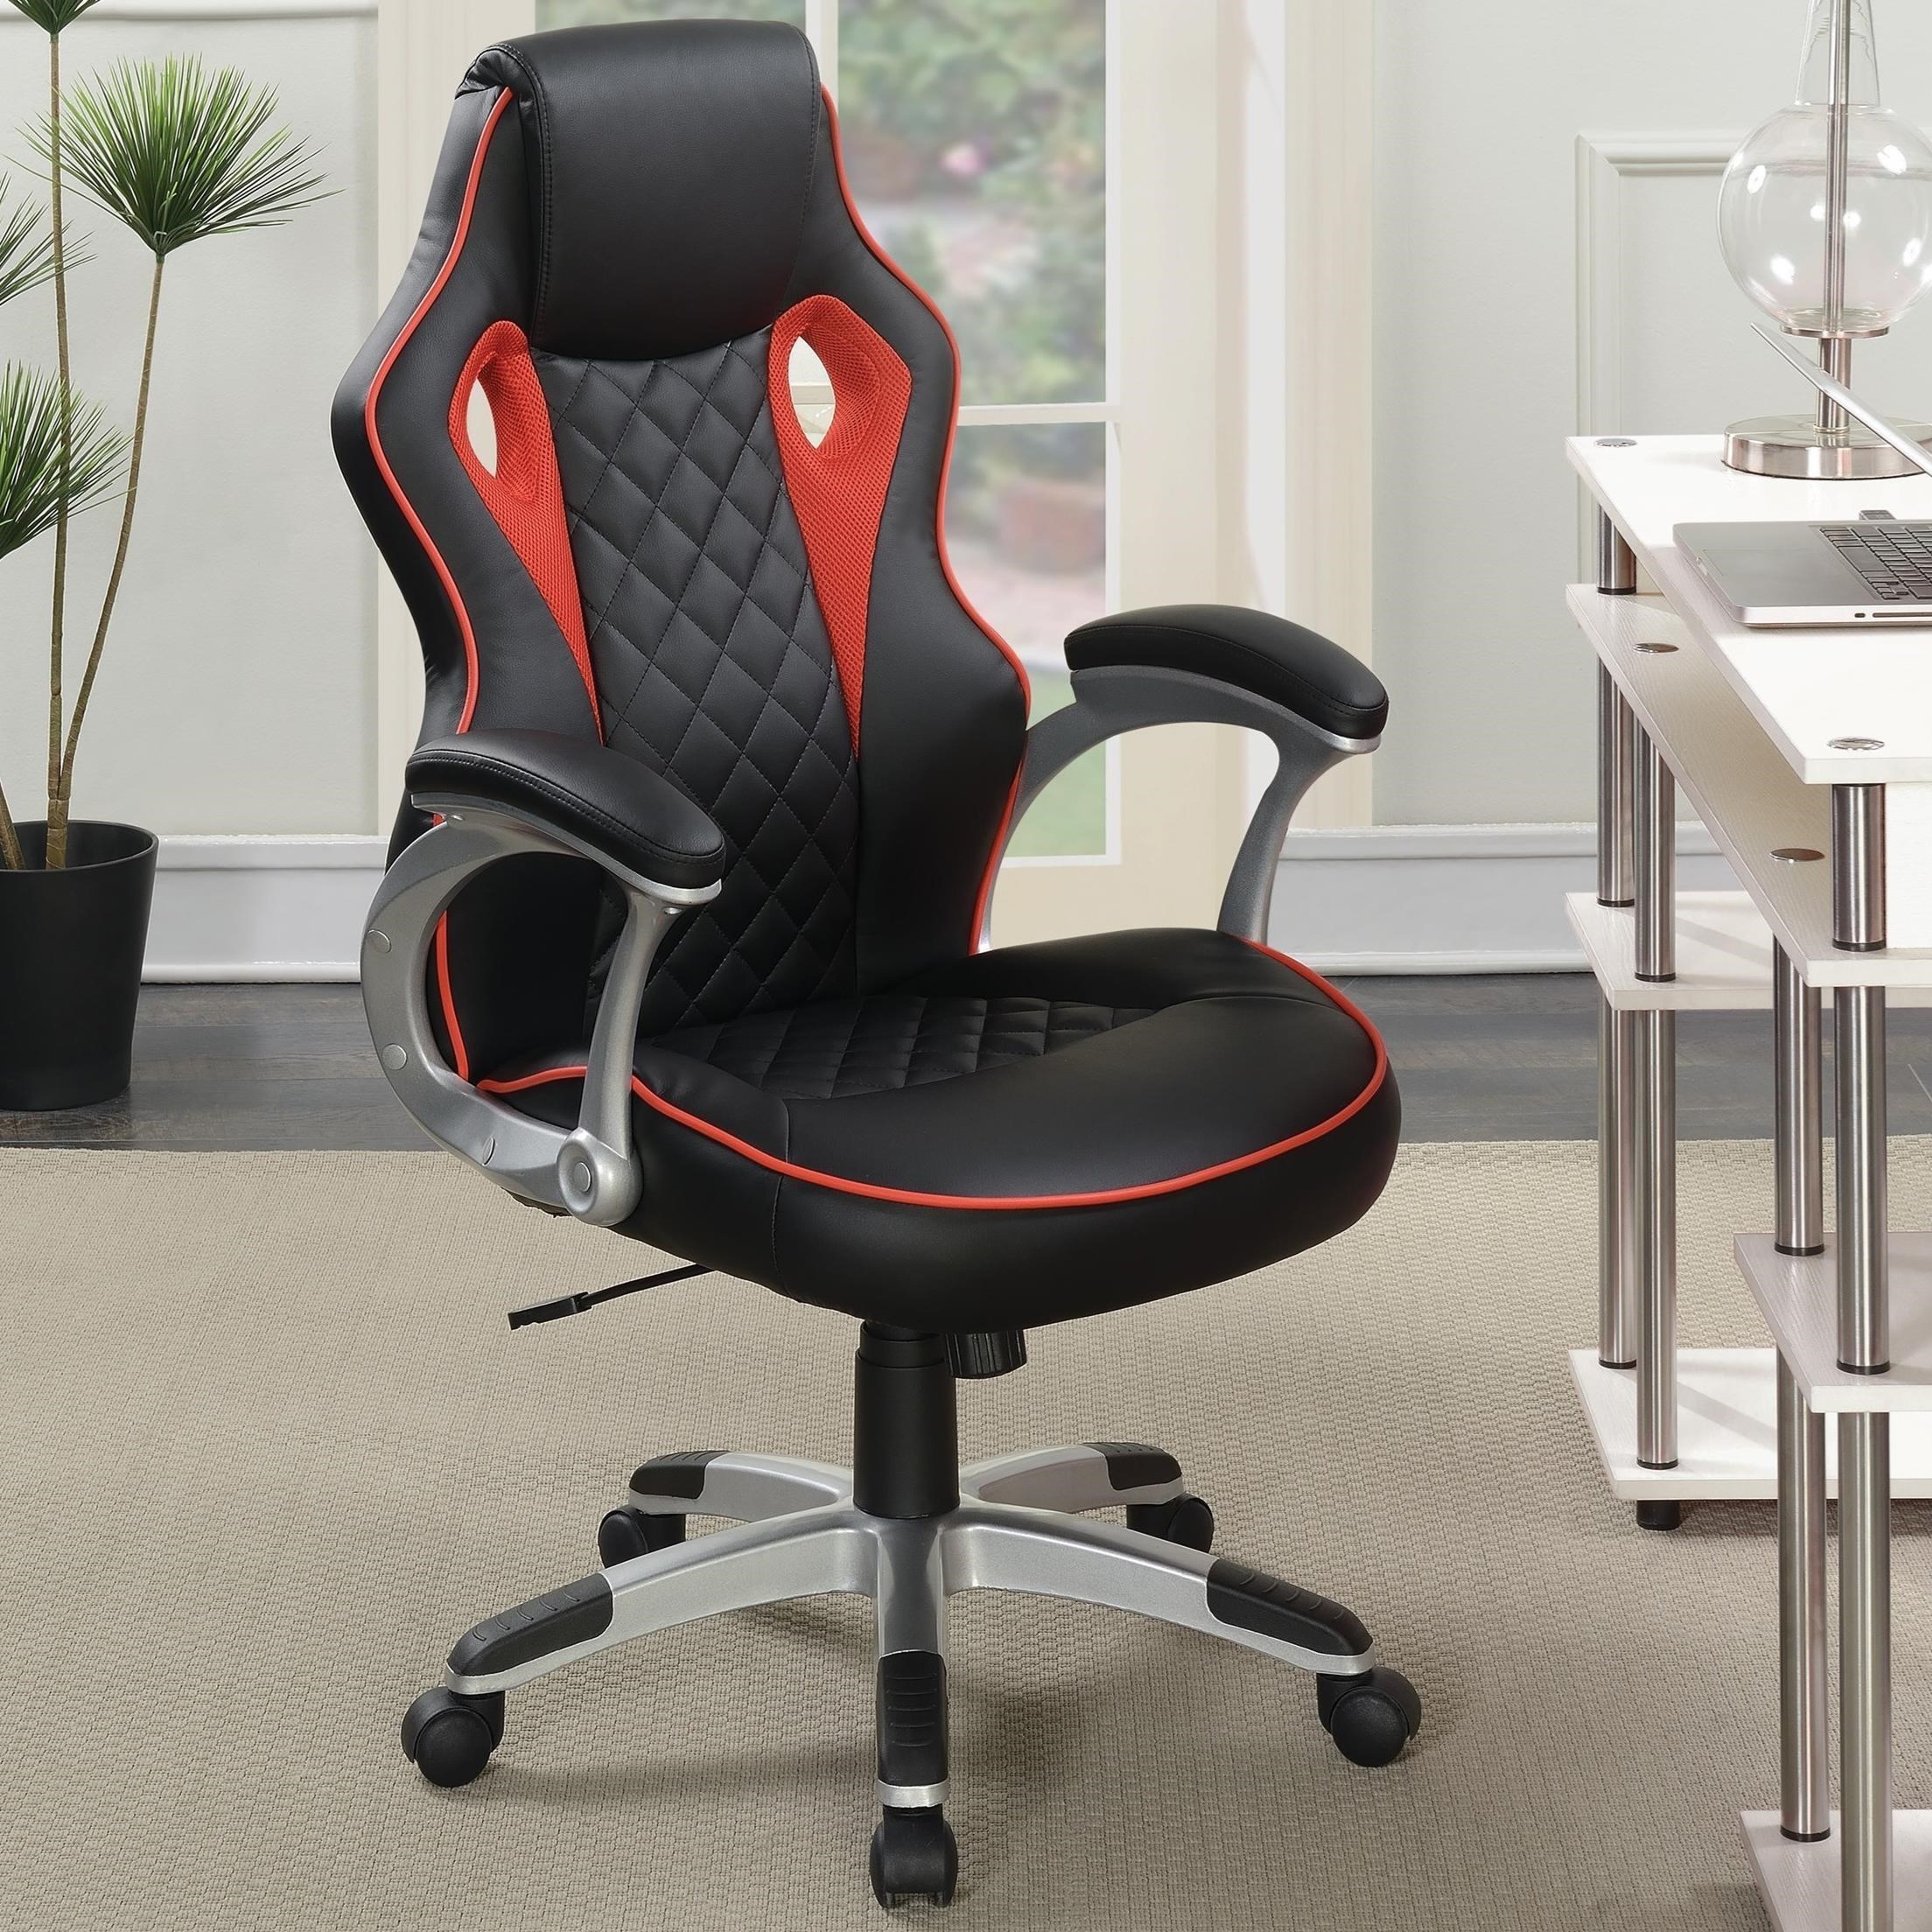 Qualities of Computer Chairs